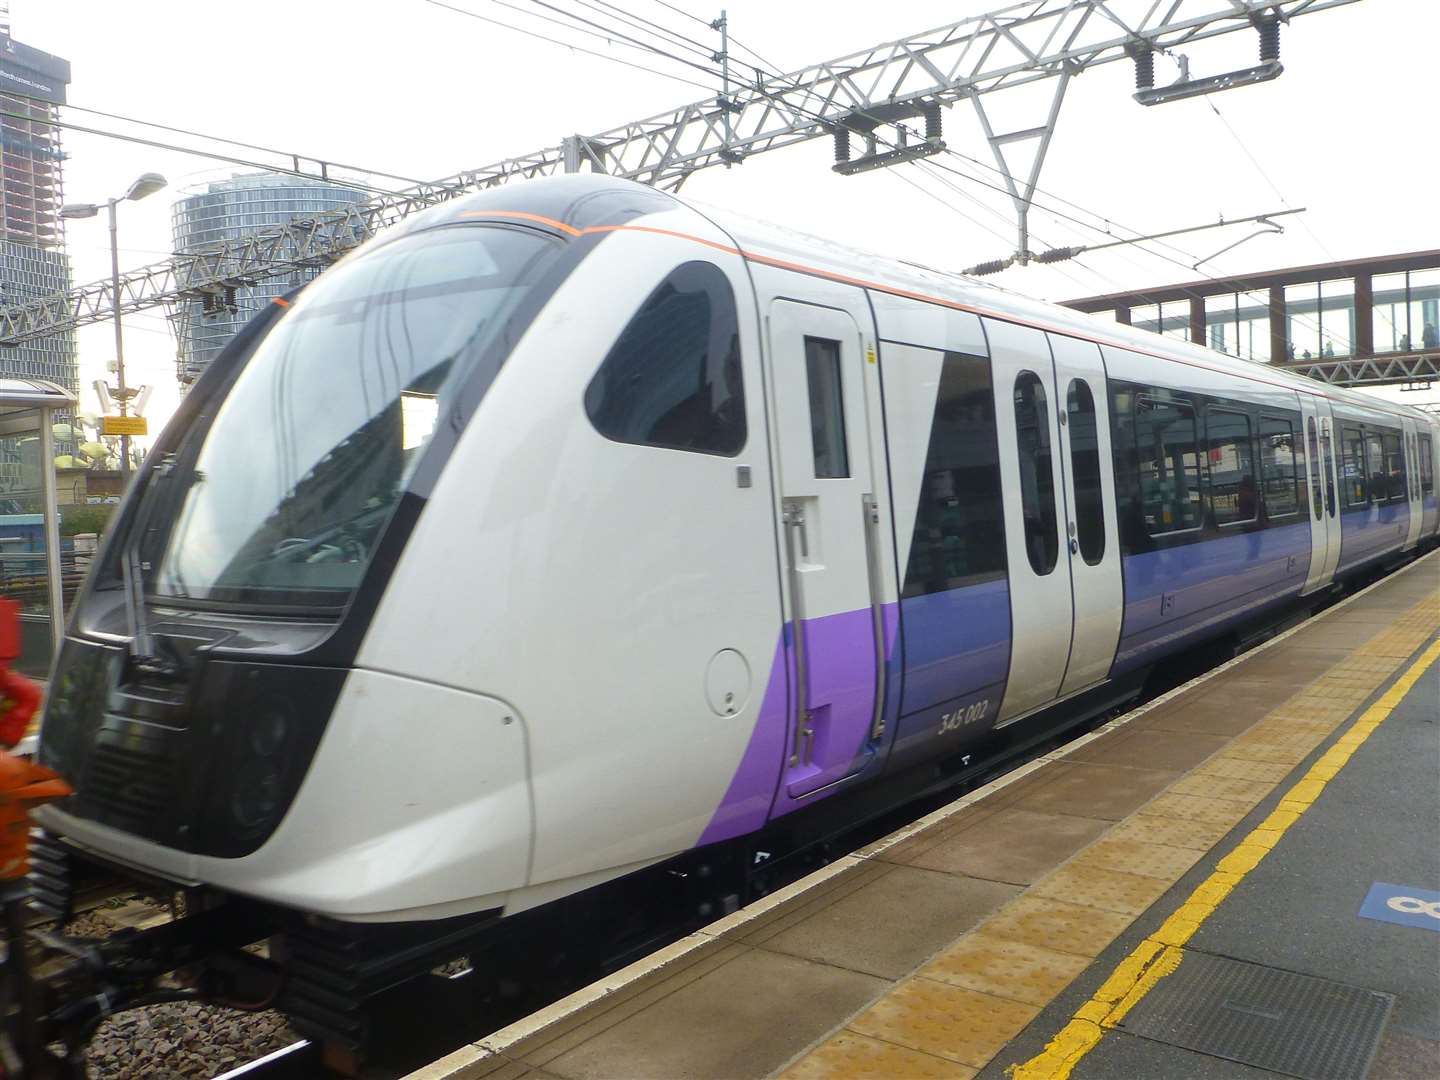 The Elizabeth line will terminate at Abbey Wood when finished, but is behind schedule.